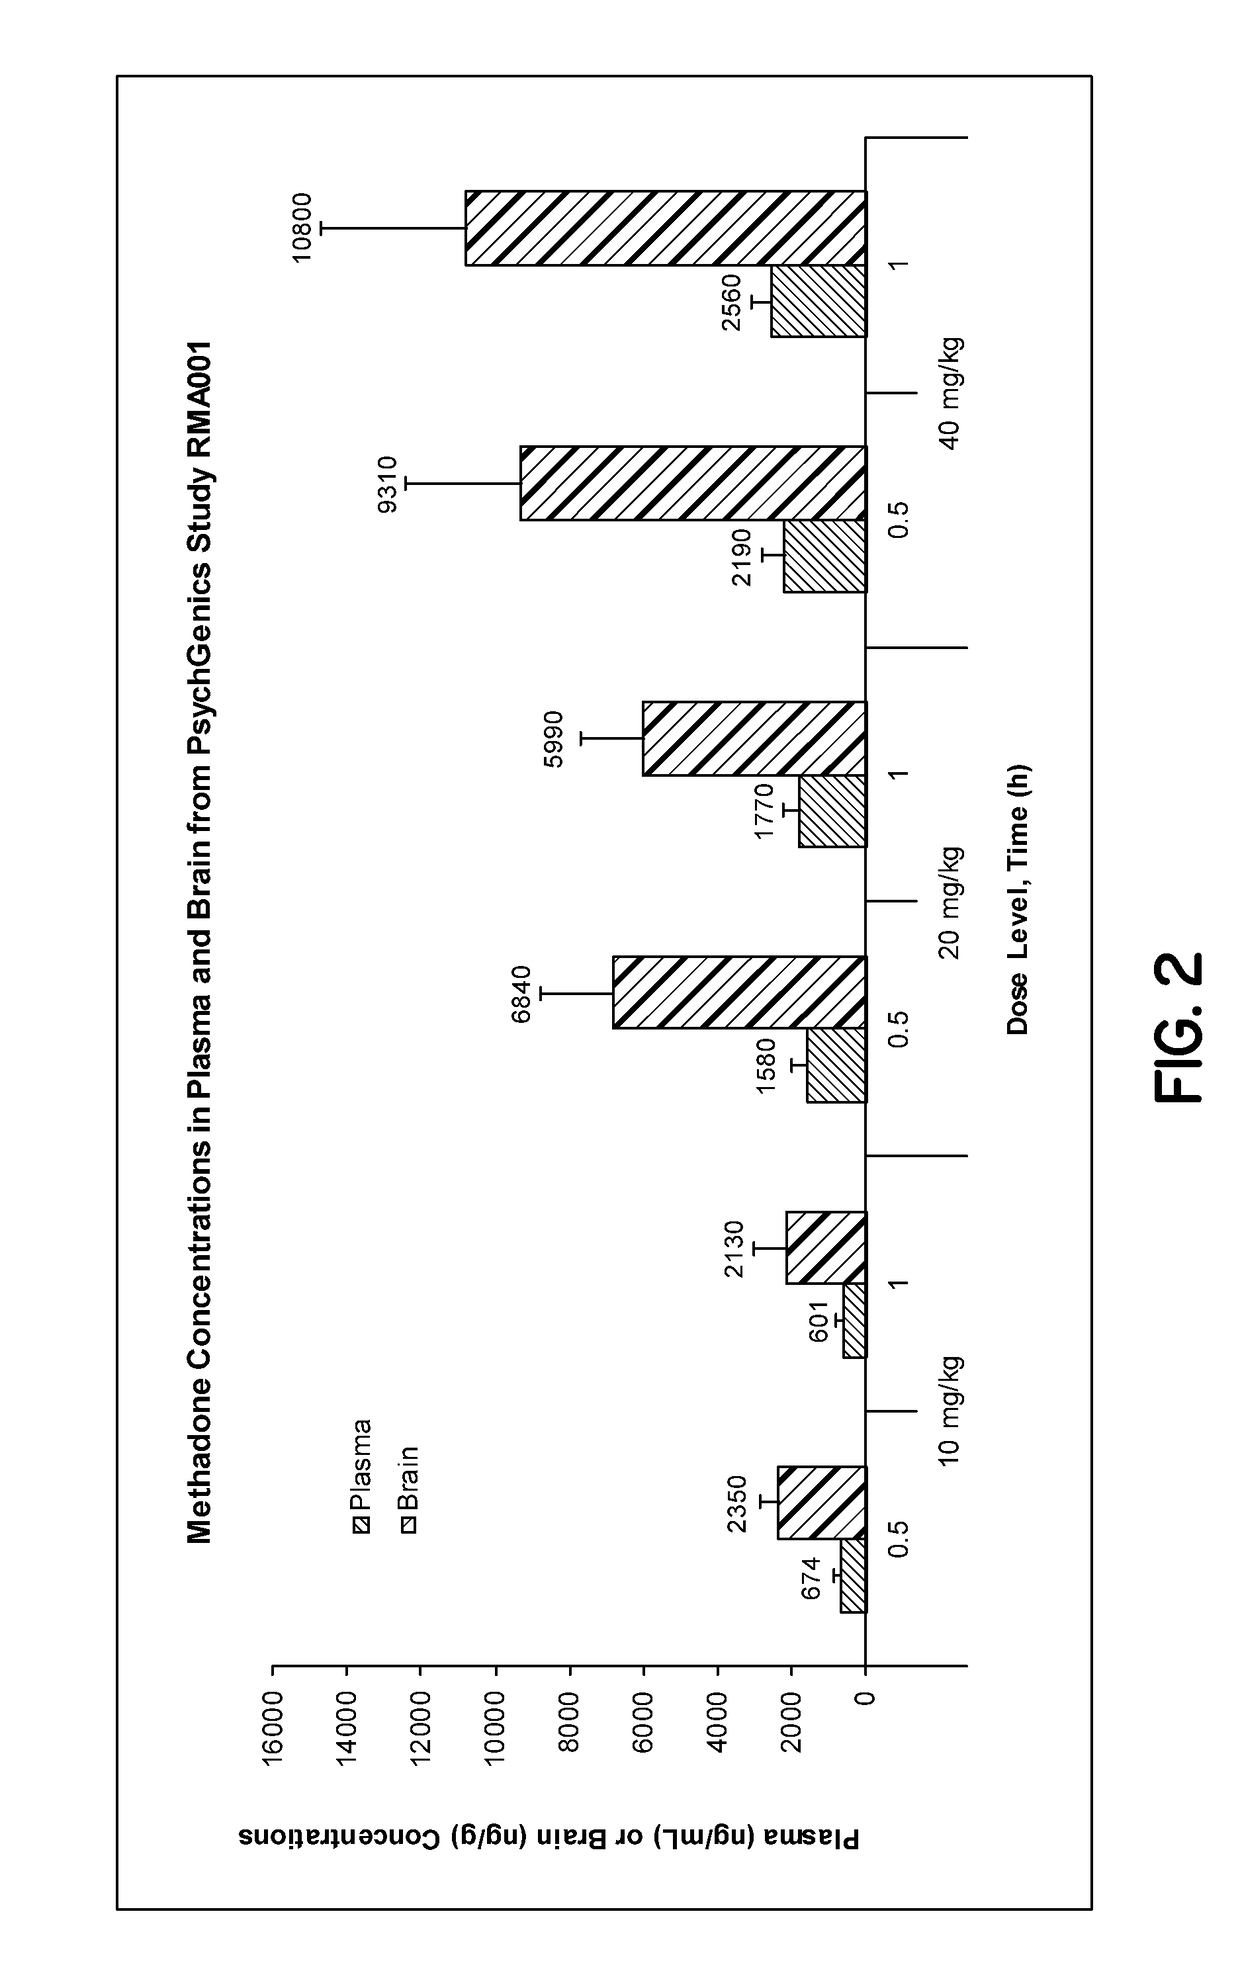 Compounds for Treatment or Prevention of Disorders of the Nervous System and Symptoms and Manifestations Thereof, and for Cyto-Protection Against Diseases and Aging of Cells, and Symptoms and Manifestations Thereof